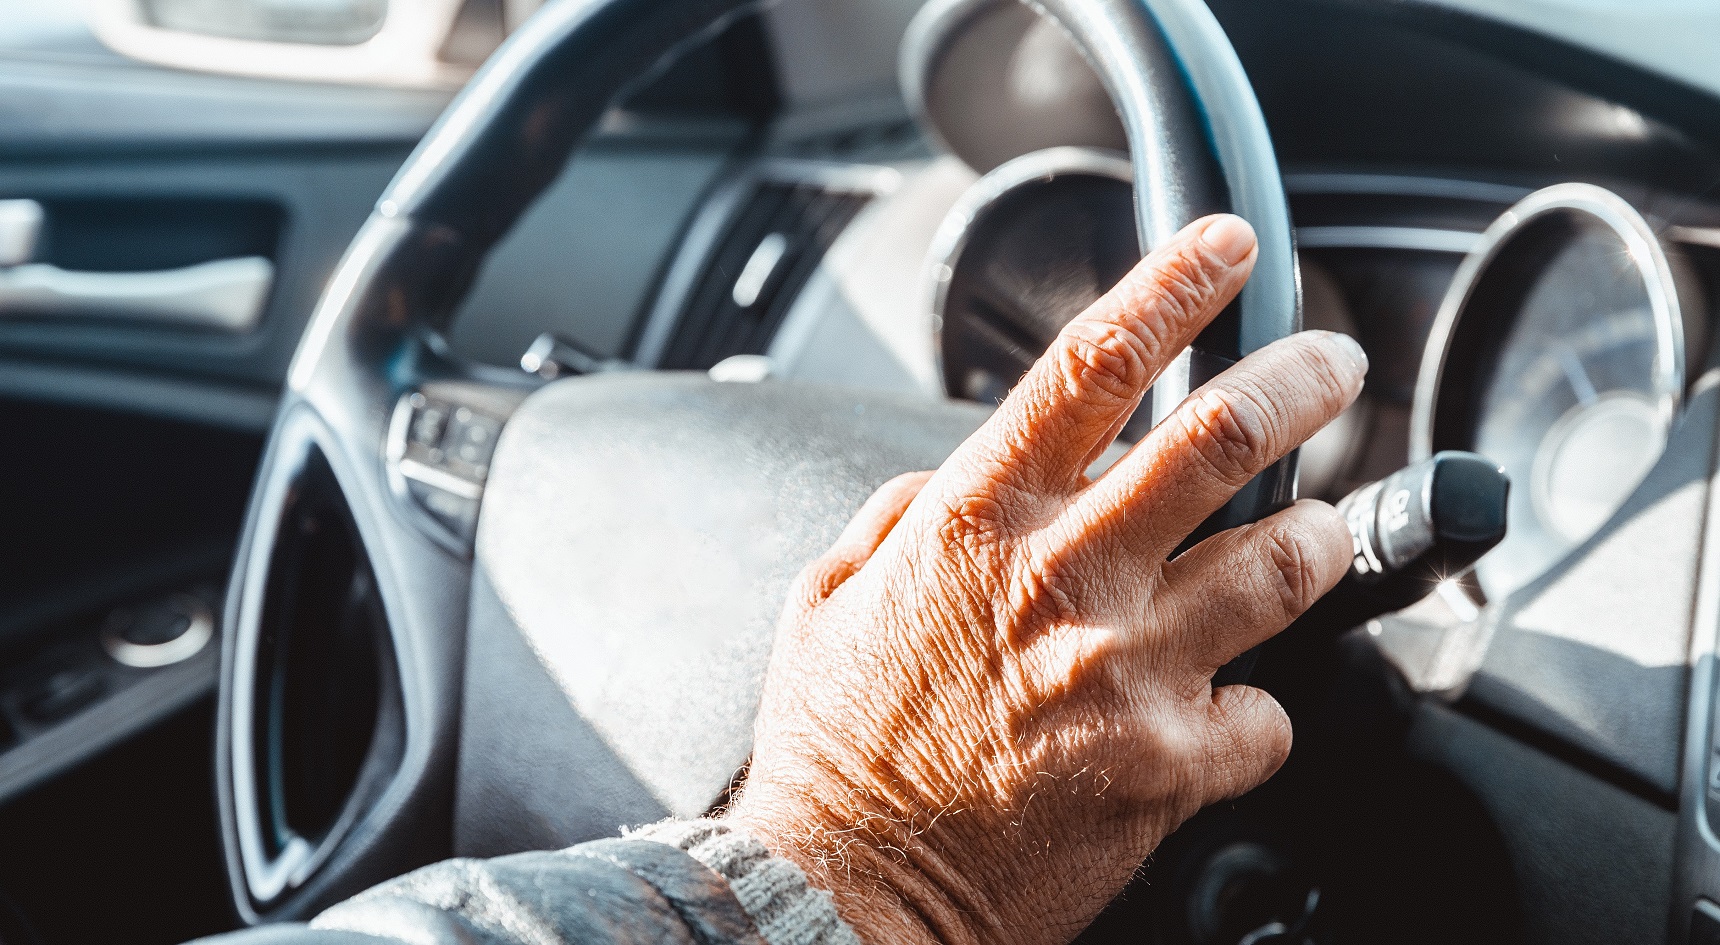 Behind the wheel, dementia sufferers may find themselves becoming lost in familiar areas.